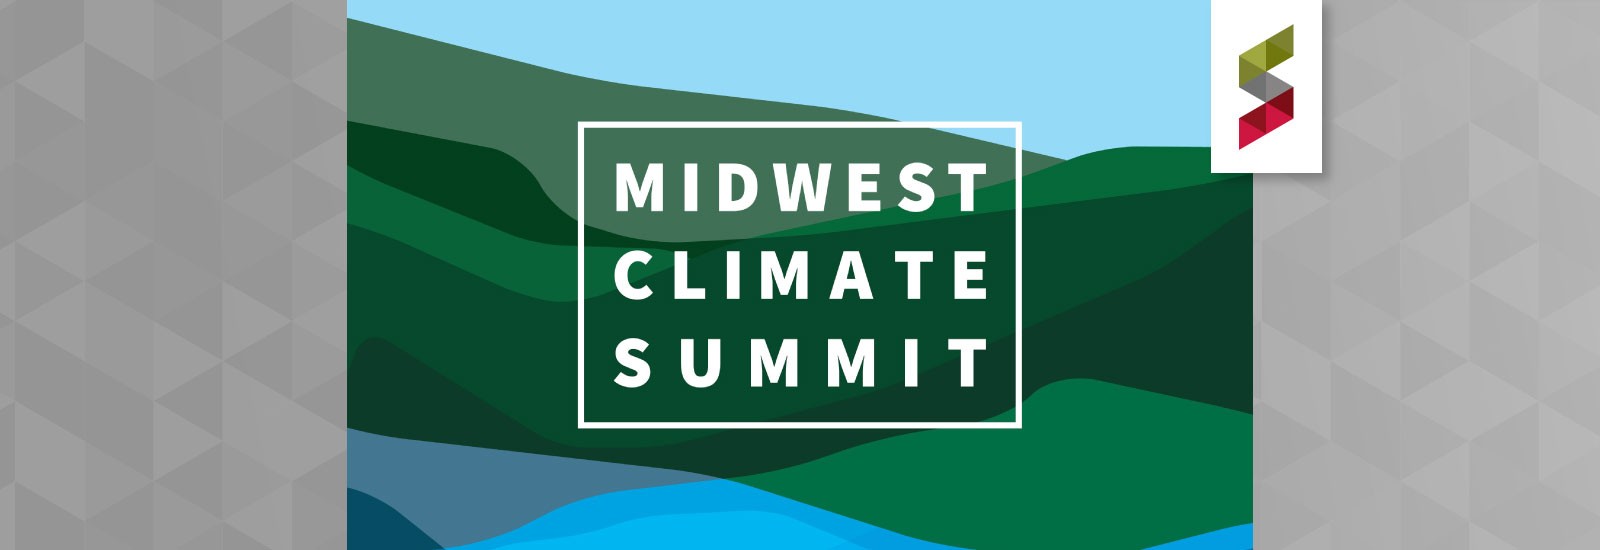 MidWest Climate Summit Logo